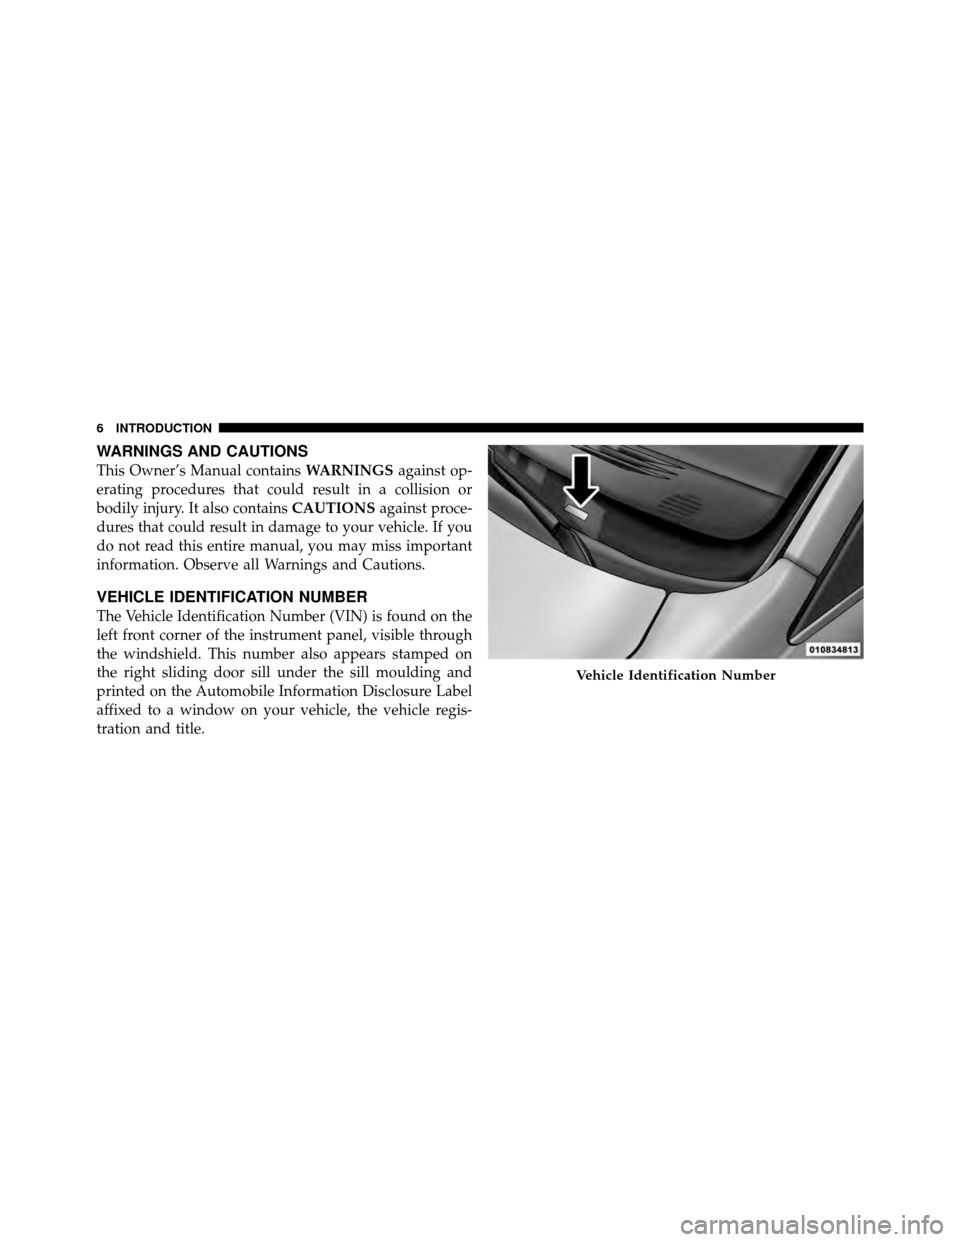 CHRYSLER TOWN AND COUNTRY 2011 5.G Owners Manual WARNINGS AND CAUTIONS
This Owner’s Manual containsWARNINGSagainst op-
erating procedures that could result in a collision or
bodily injury. It also contains CAUTIONSagainst proce-
dures that could r